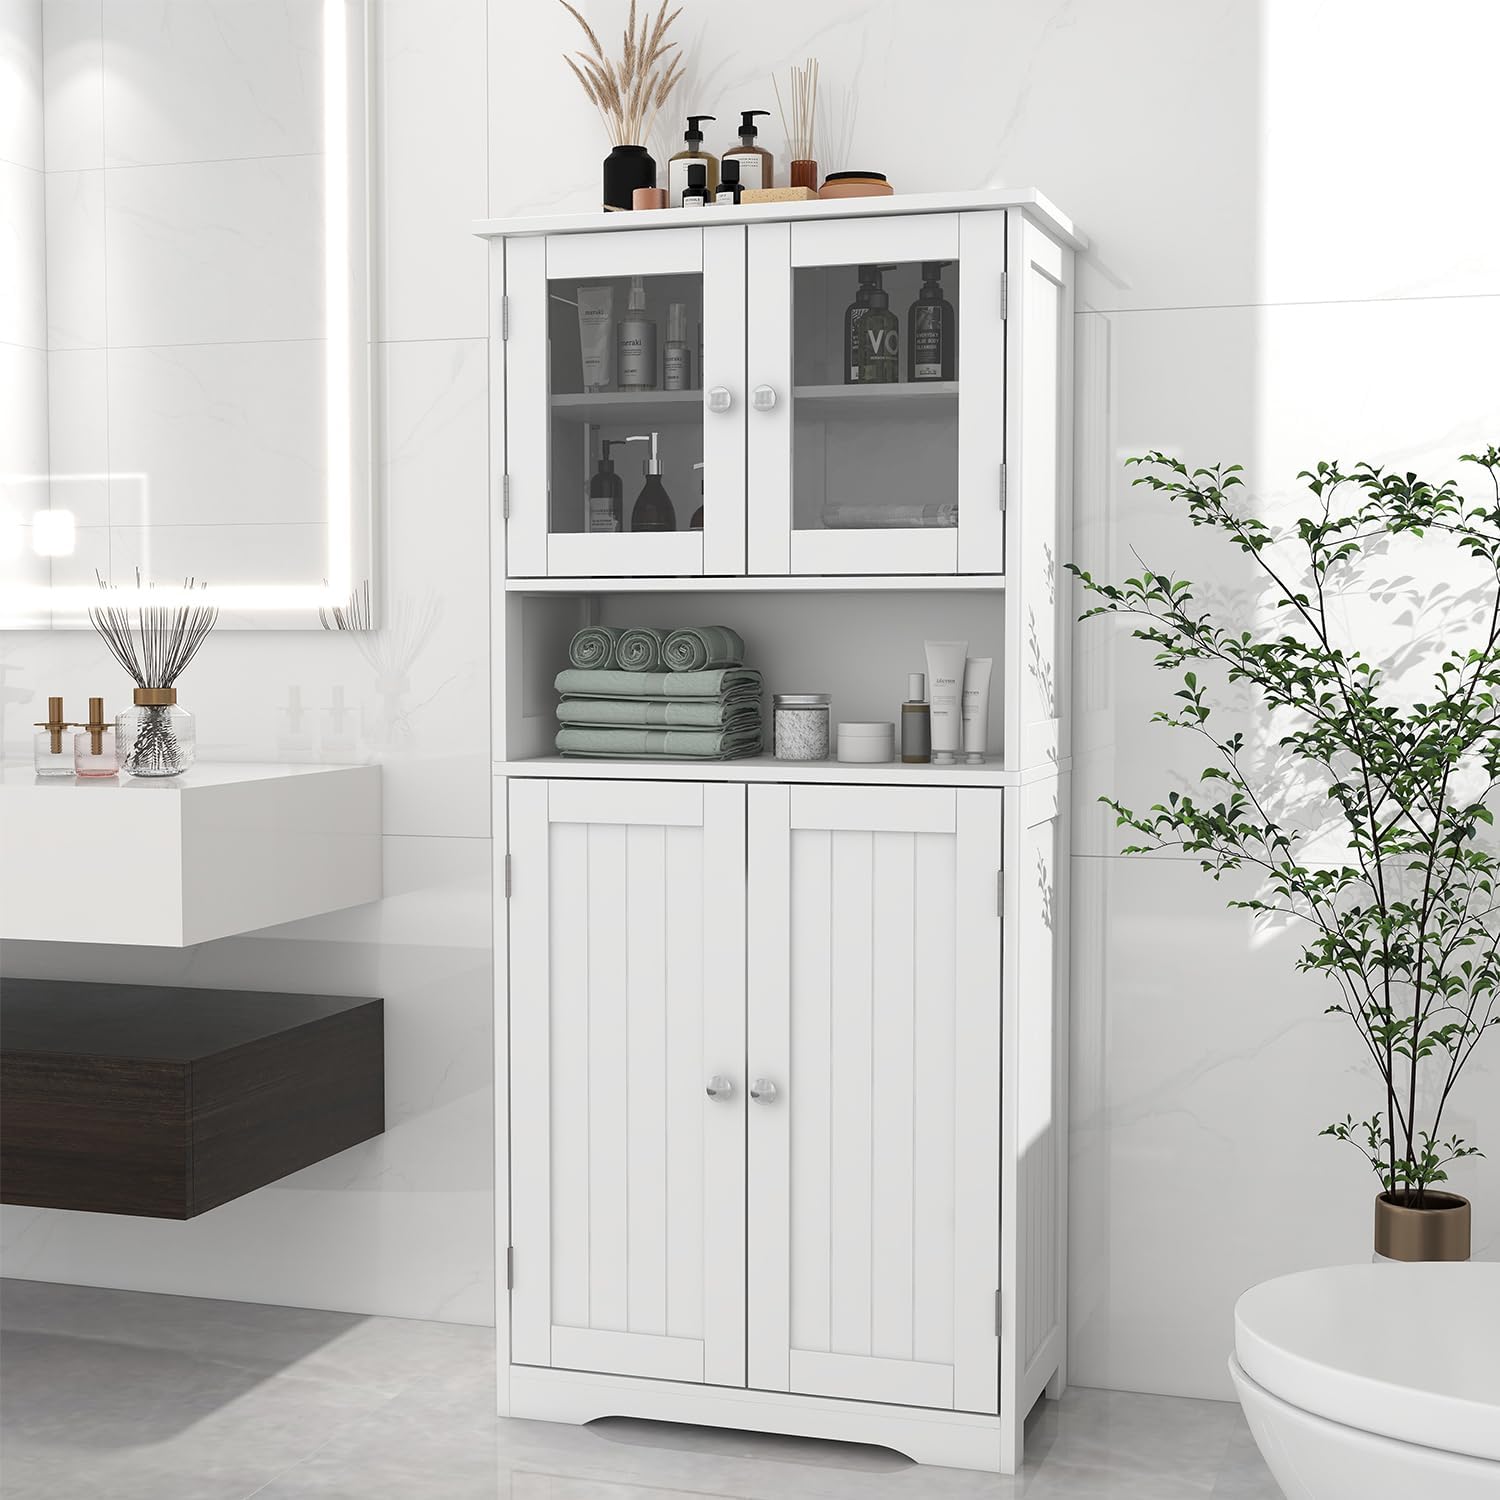 Very nice cabinet fit in my bathroom. Easy to install, come with all the piece needed and a very clear instruction. Would really recommend if you need extra storage at your bathroom.